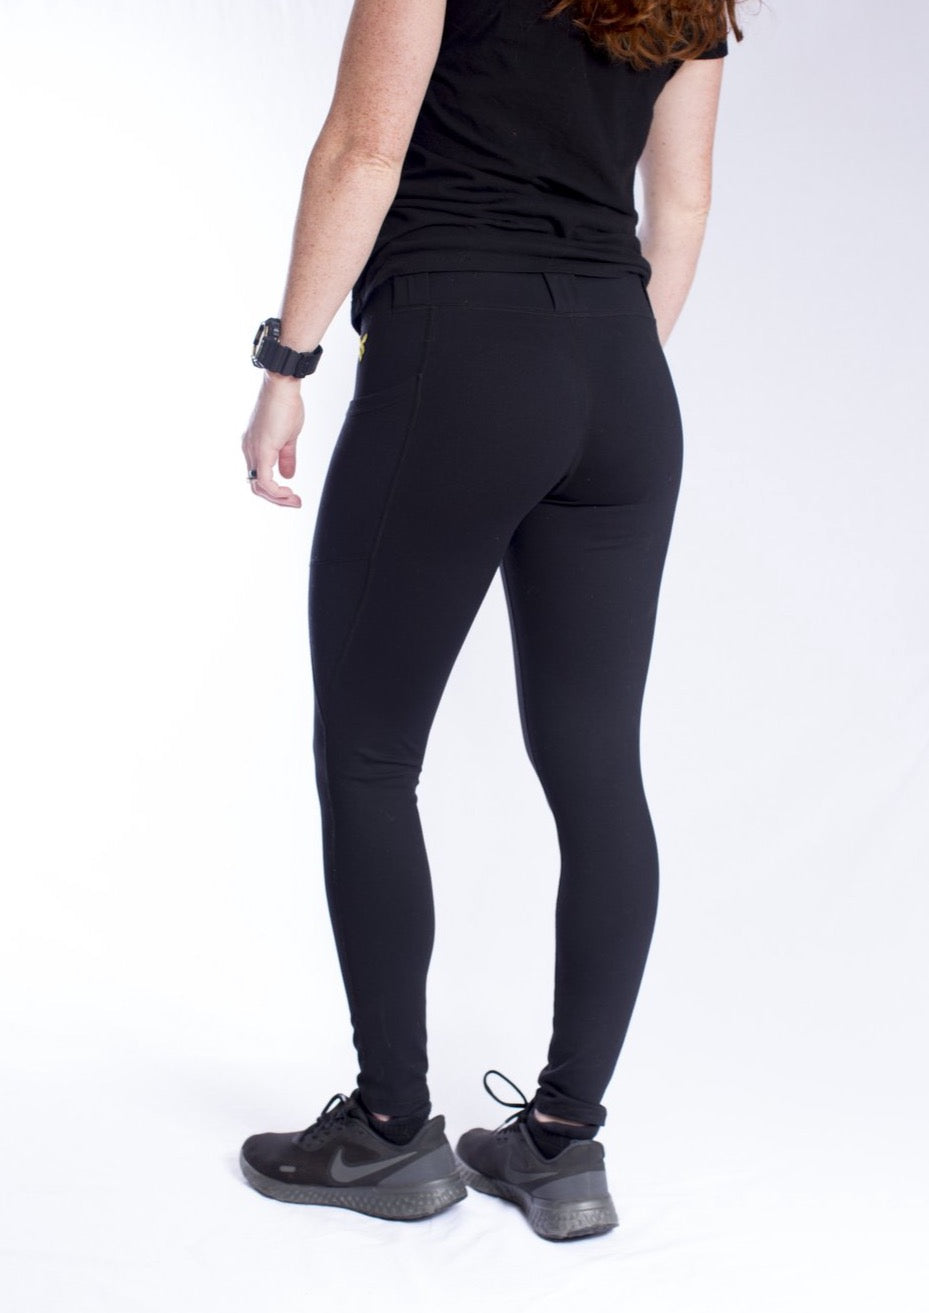 Black is back! We are restocked in our Women's EDC Leggings 🚨 Don't wait  to get your size, we'be been selling out quickly! Domestic orders should